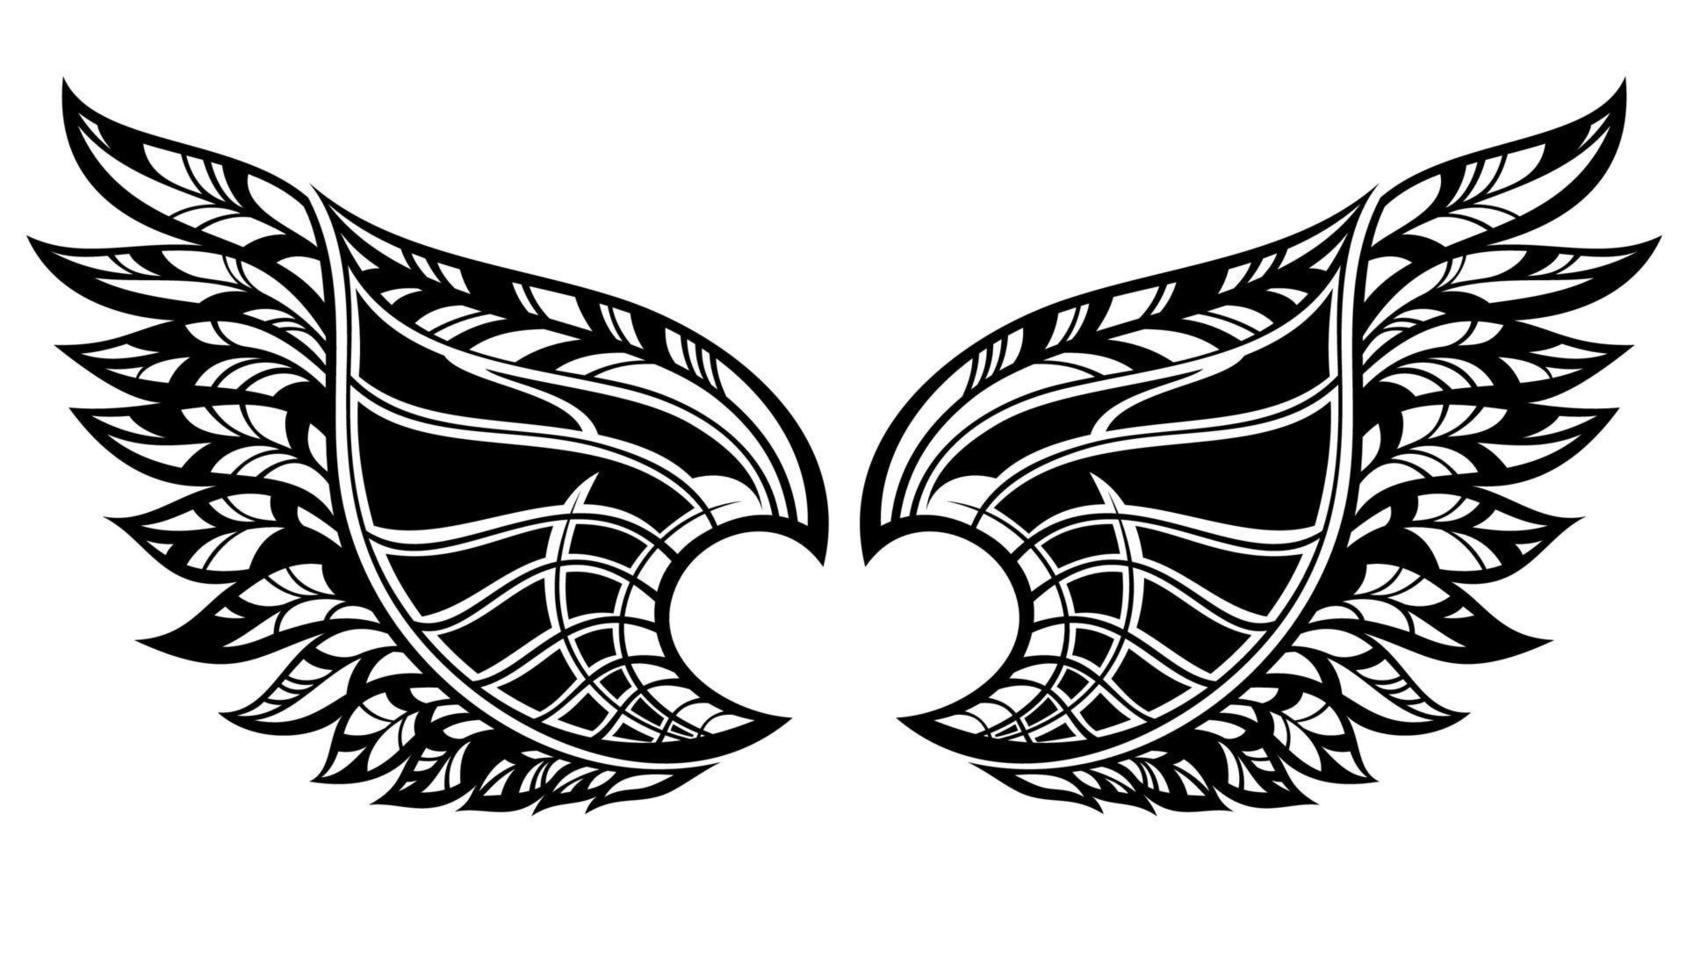 Vintage  wings sketch. Doodle stylized birds wings.  Design wing elements. Decortion for card design. Abstract sign for mug,t-shirt,phone case. Ideal for printing, posters, textiles. vector